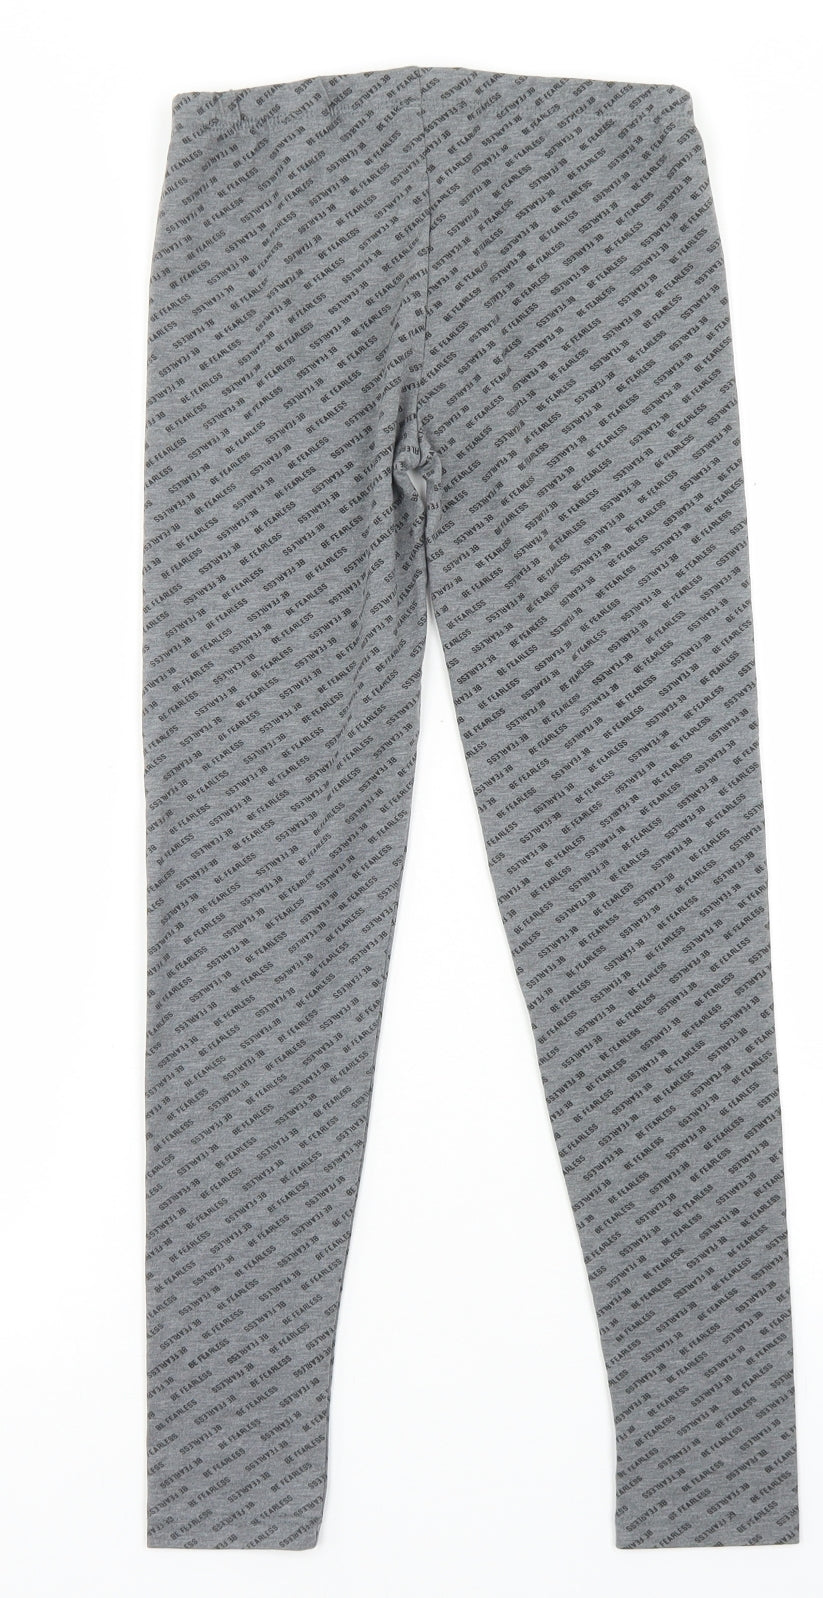 Primark Girls Grey Spotted Polyester Capri Trousers Size 8-9 Years  Regular  - Be Fearless